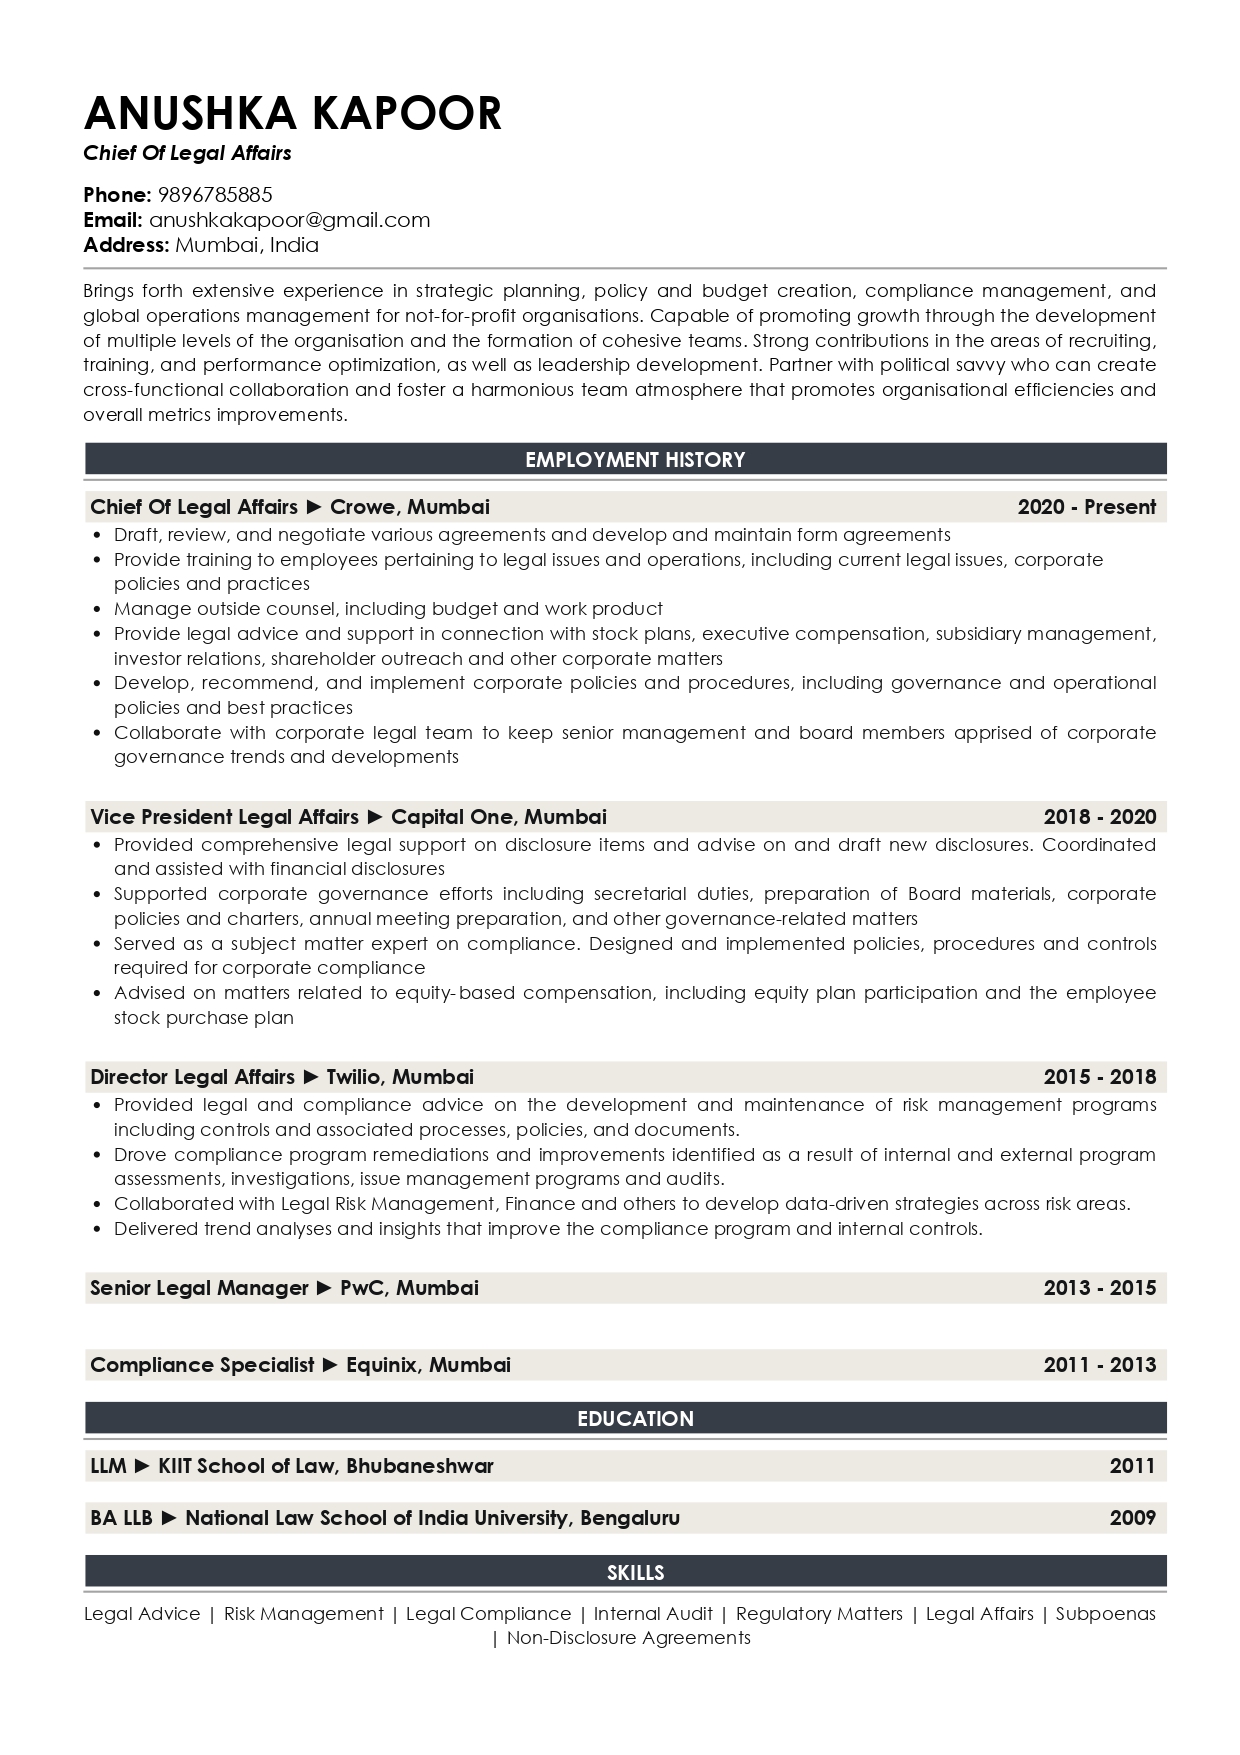 Sample Resume of Chief of Legal Affairs | Free Resume Templates & Samples on Resumod.co